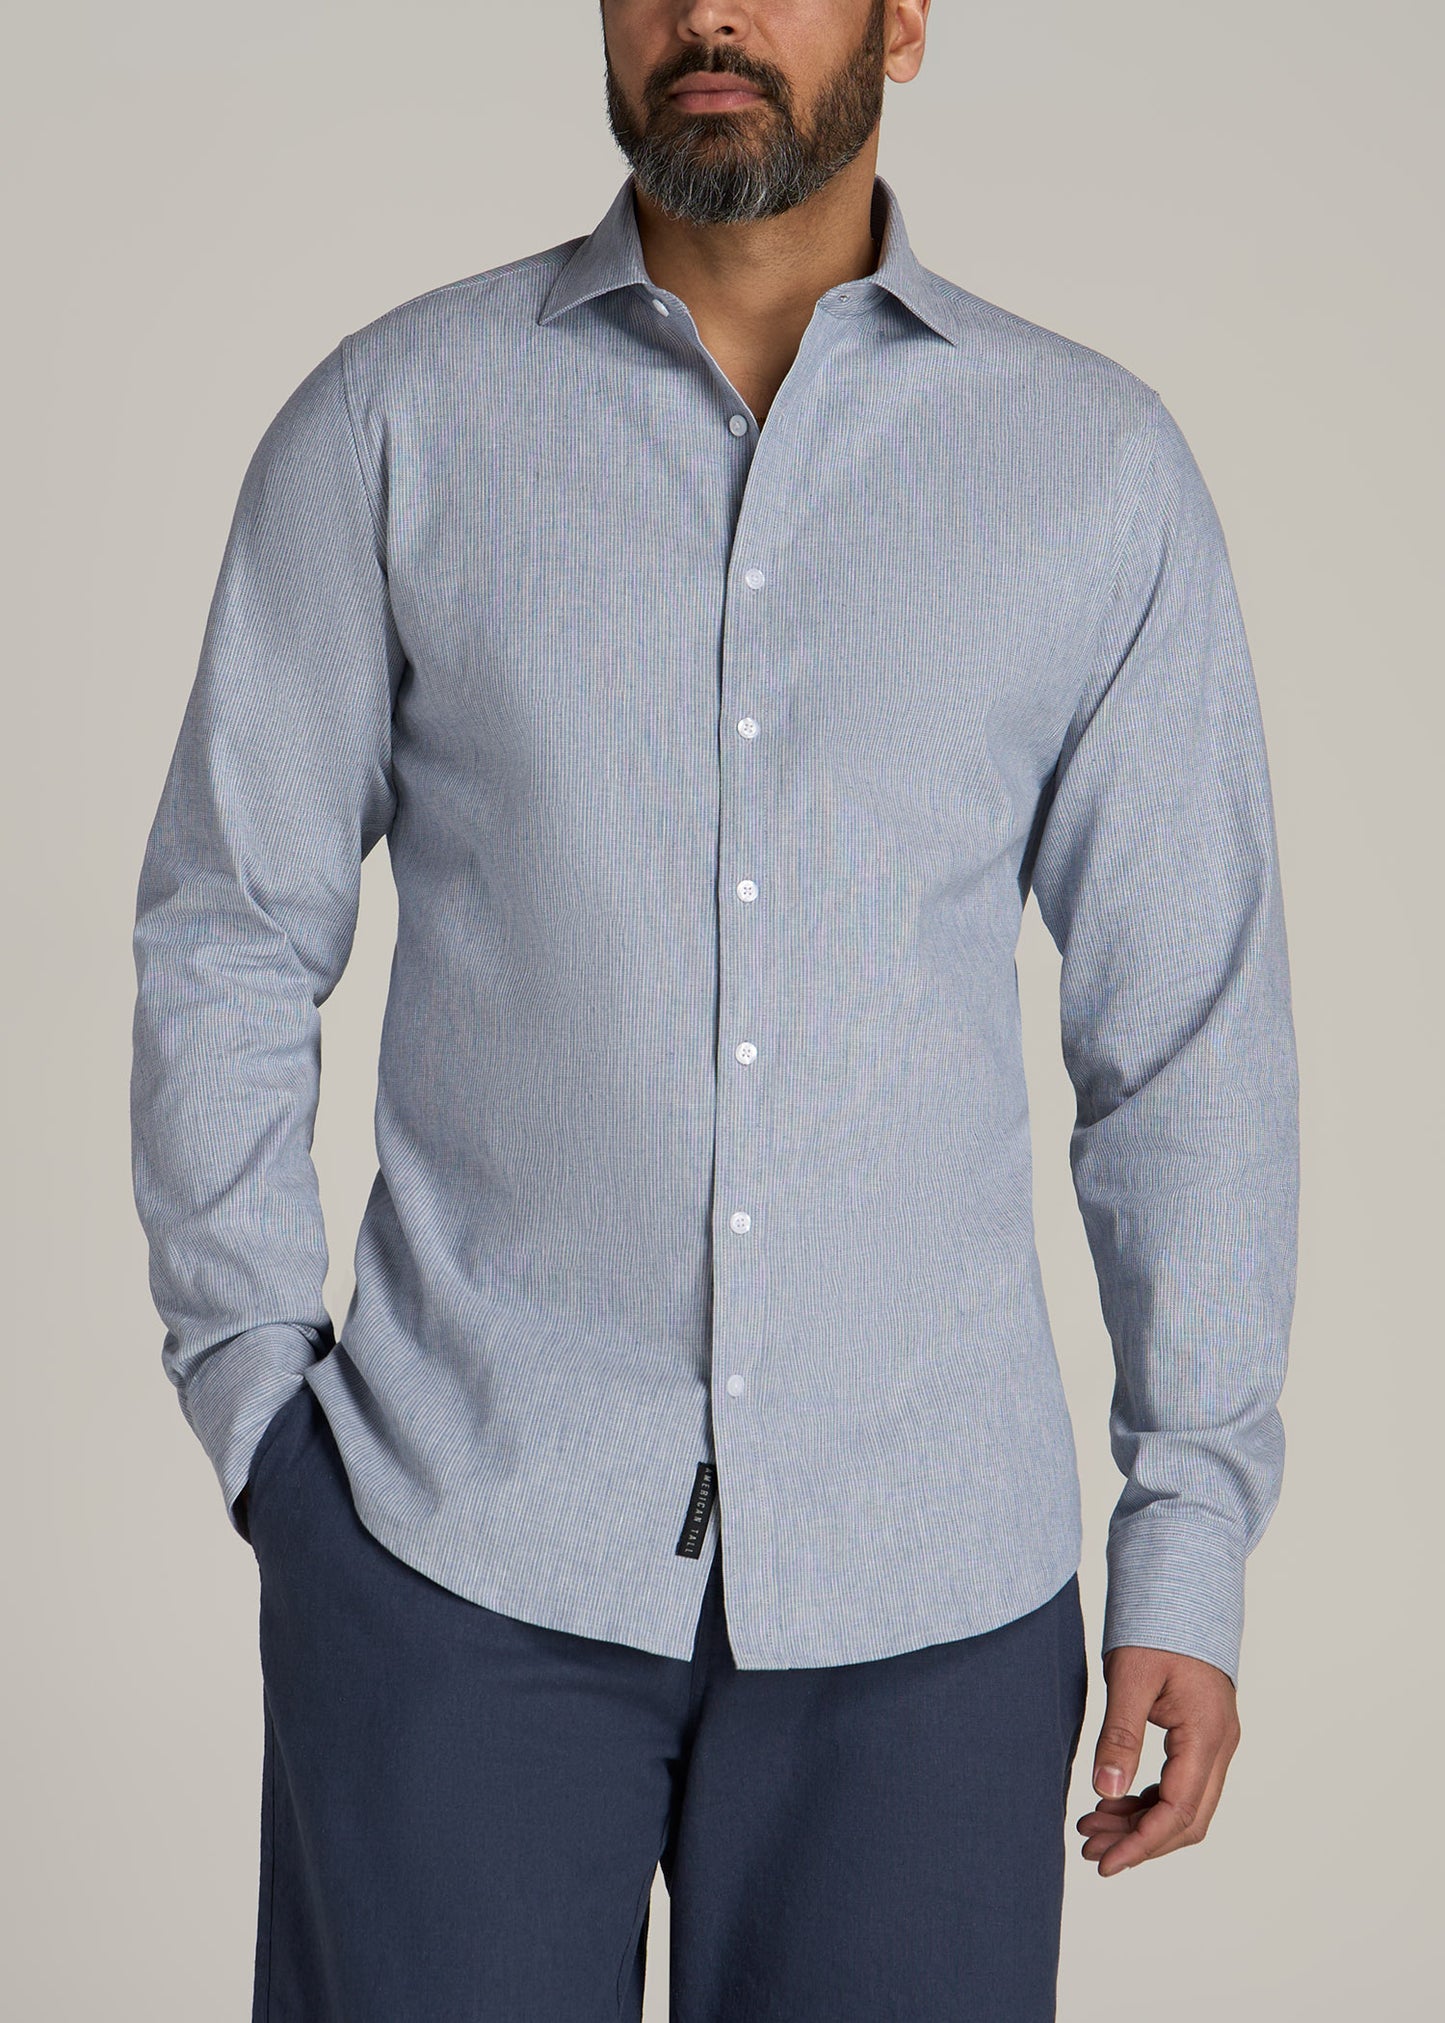 A tall man wearing American Tall's Stretch Linen Dress Shirt for Tall Men in Blue and White Pinstripe